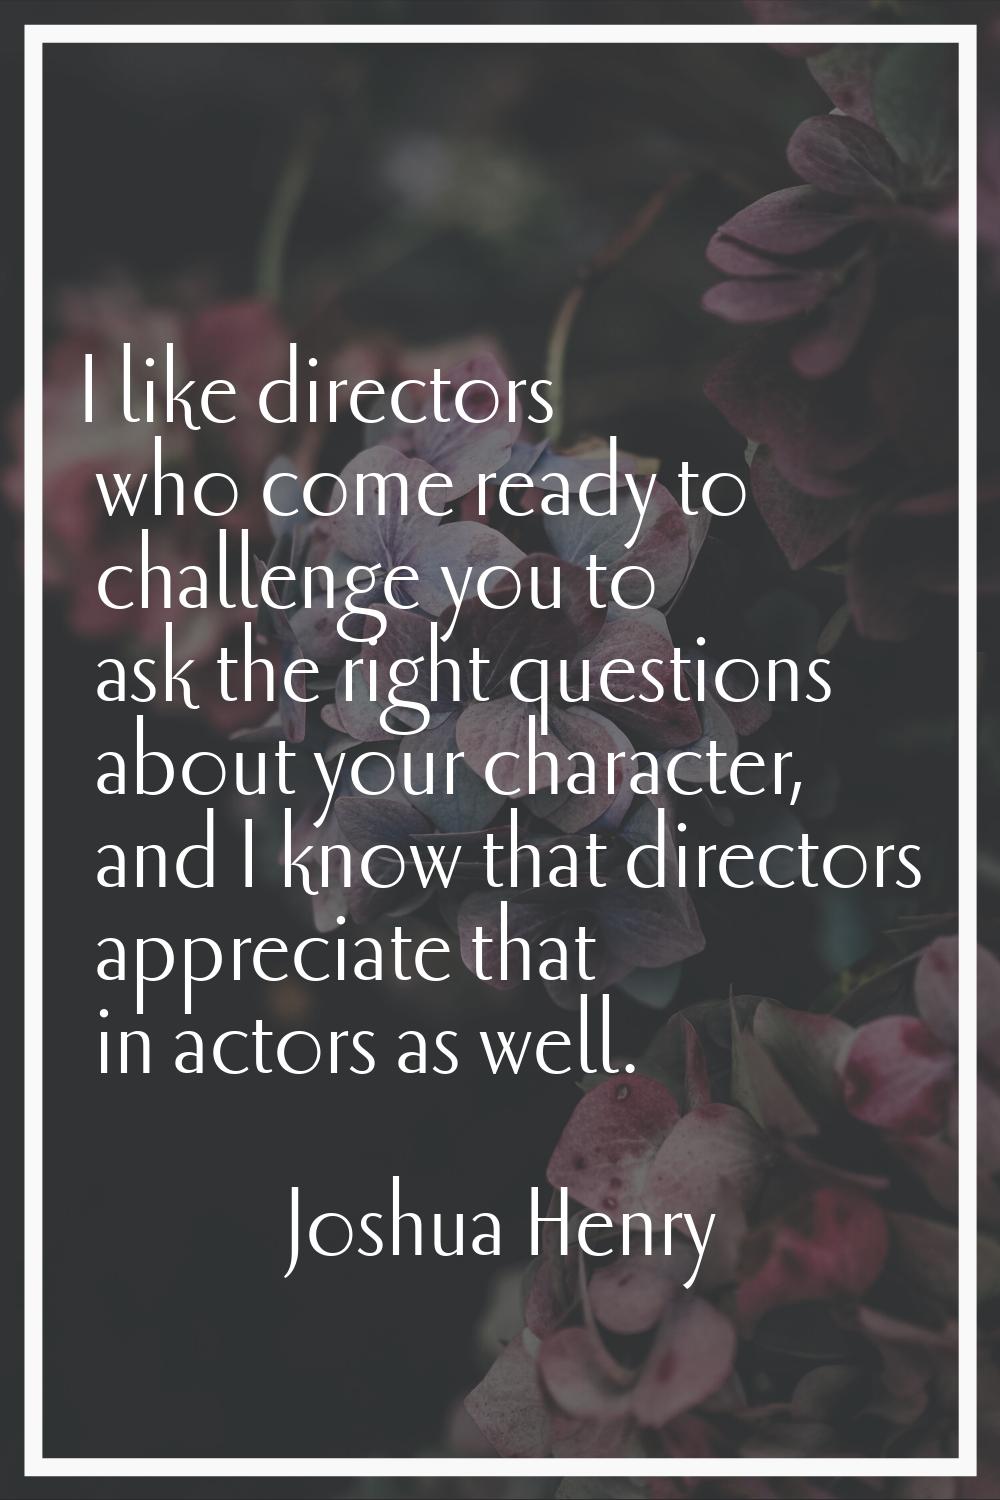 I like directors who come ready to challenge you to ask the right questions about your character, a